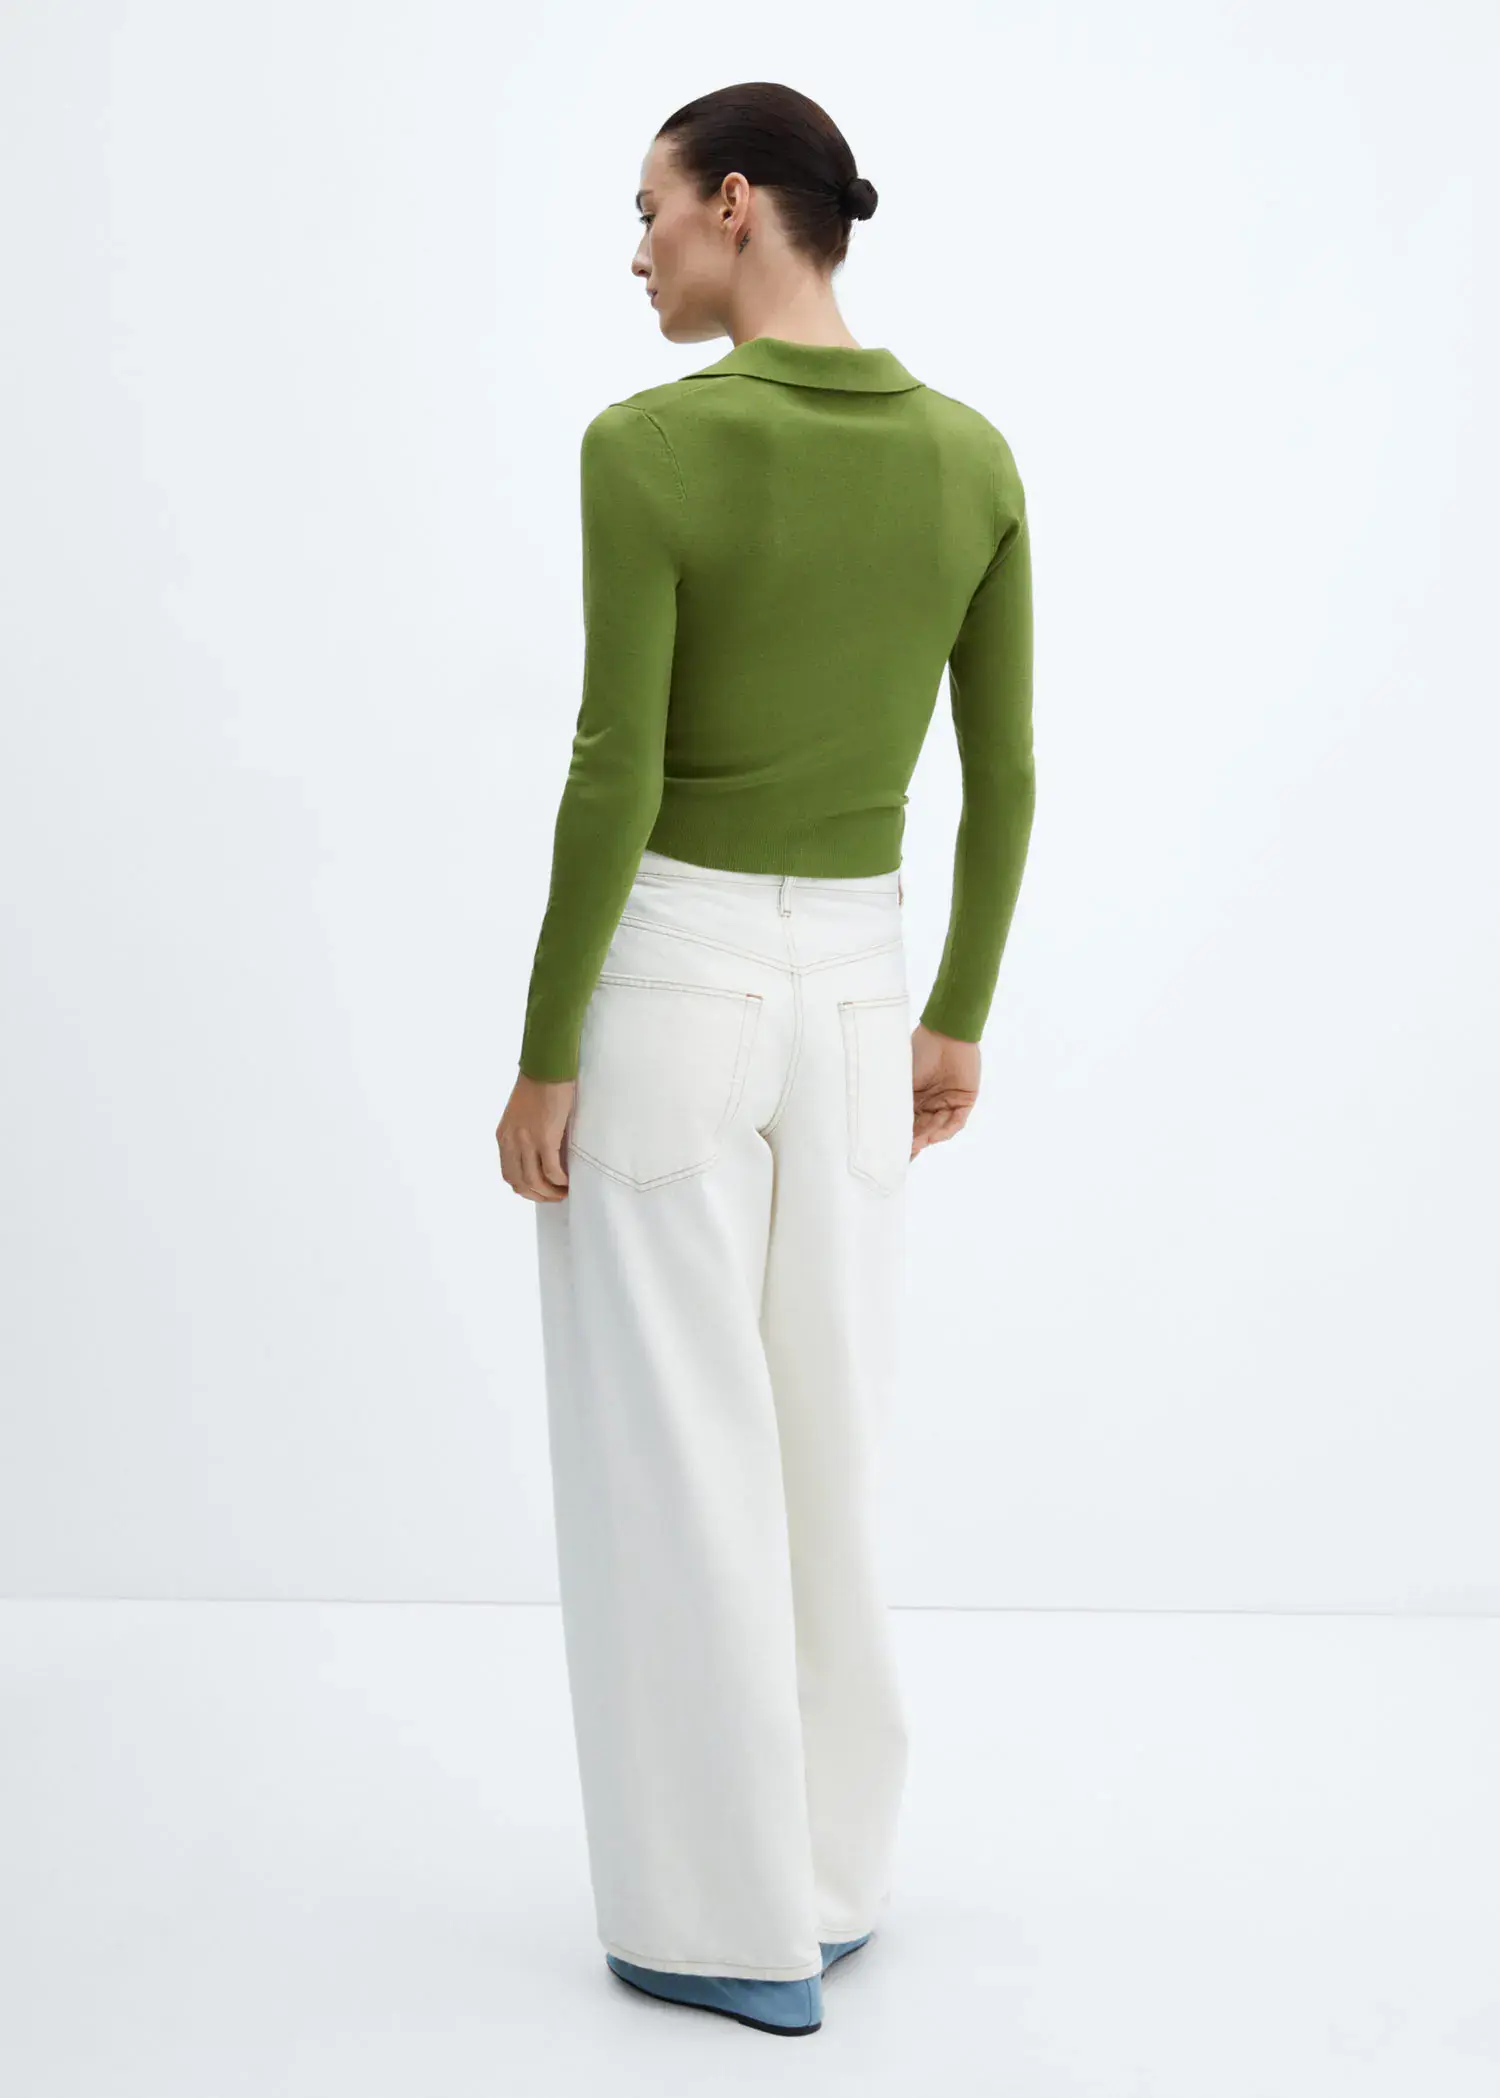 Mango Knitted polo neck sweater. 3